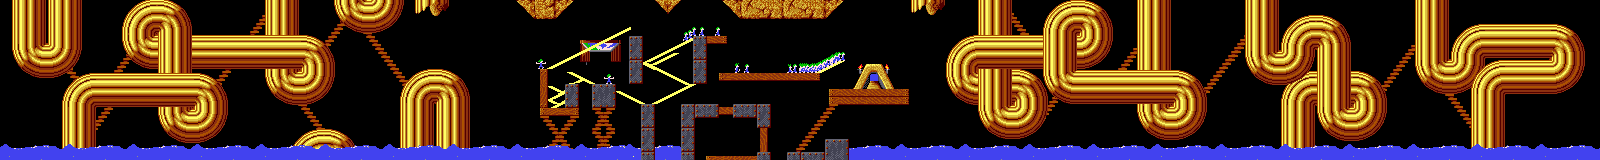 Overview: Lemmings, Amiga, Mayhem, 25 - Have a nice day!